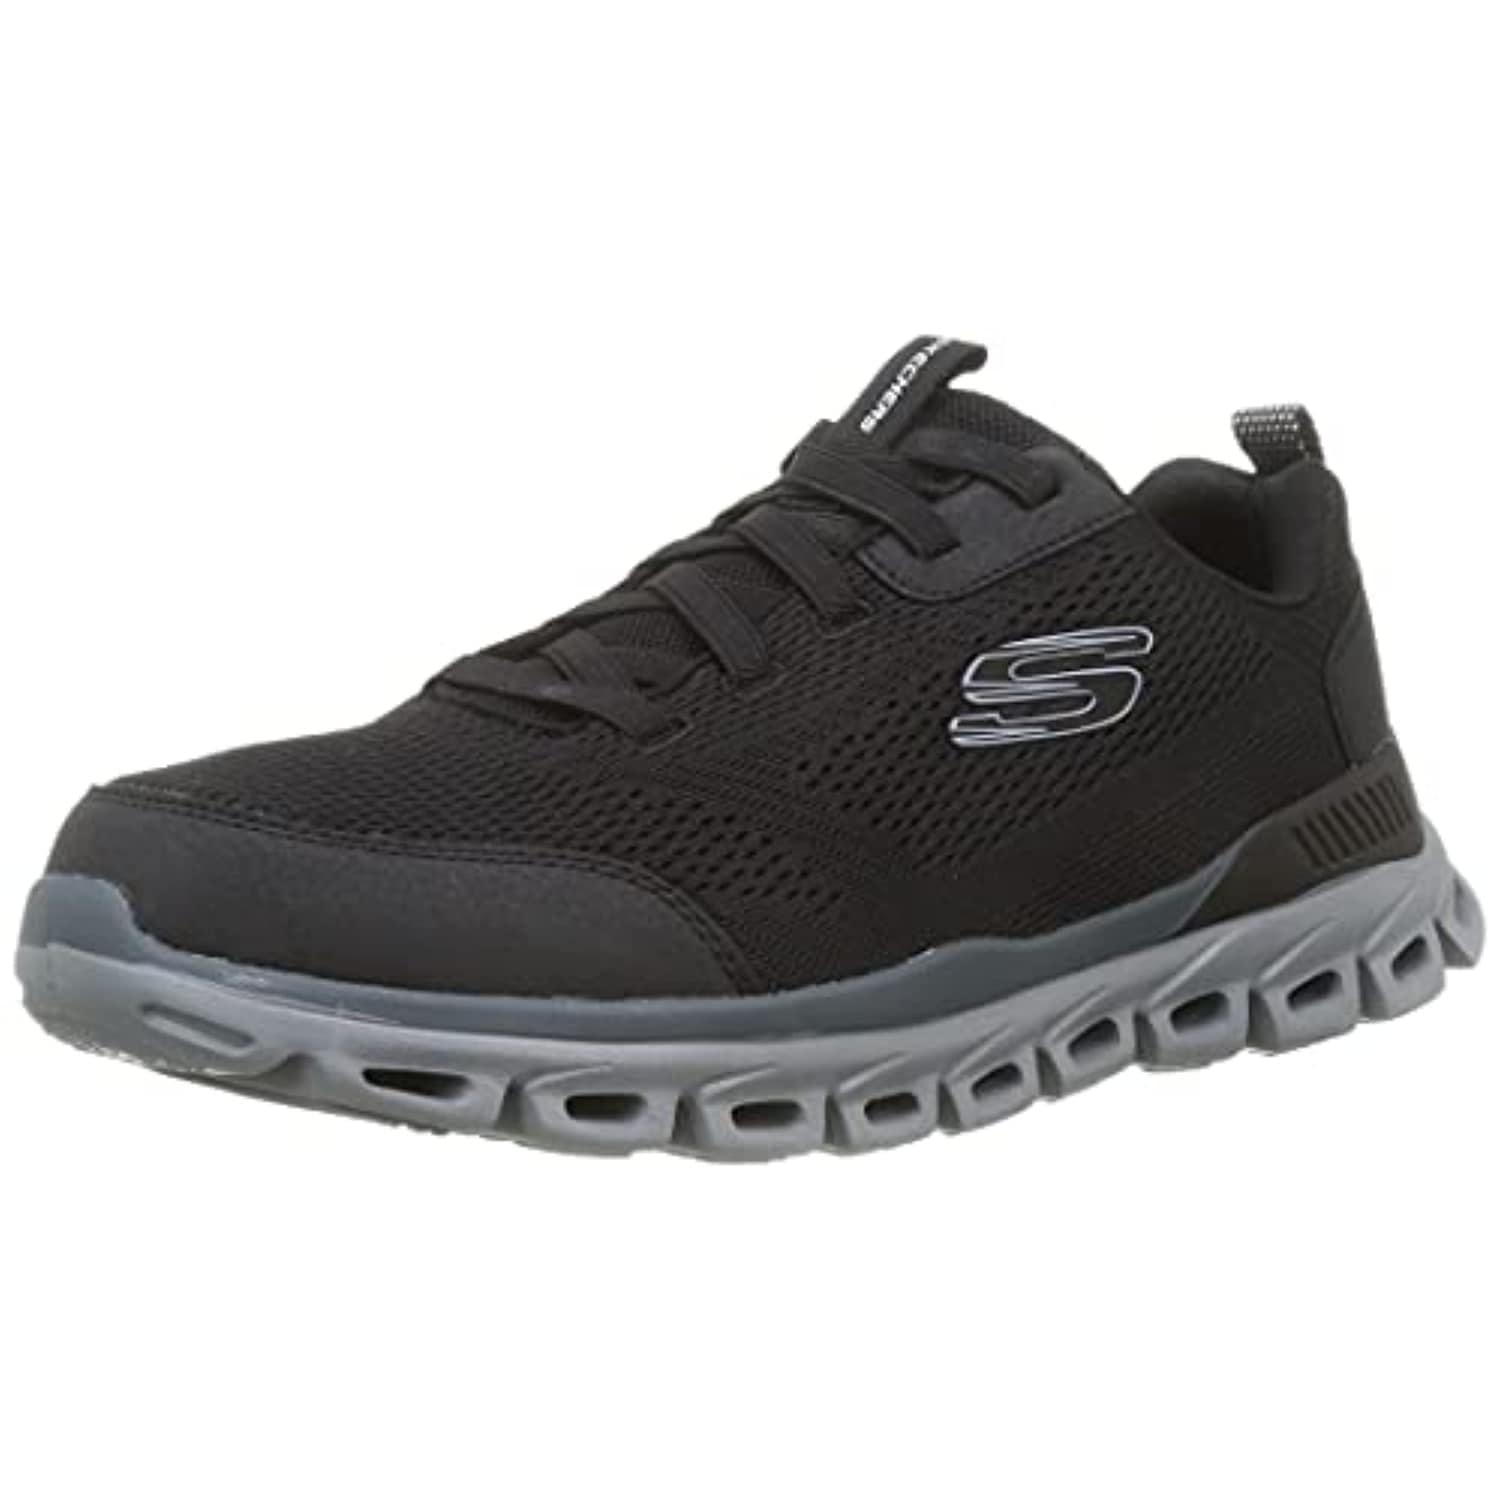 Shop Now The Skechers Men's Glide Step Stretch Lace Sneaker Loafer, Black/Gray | AccuWeather Shop